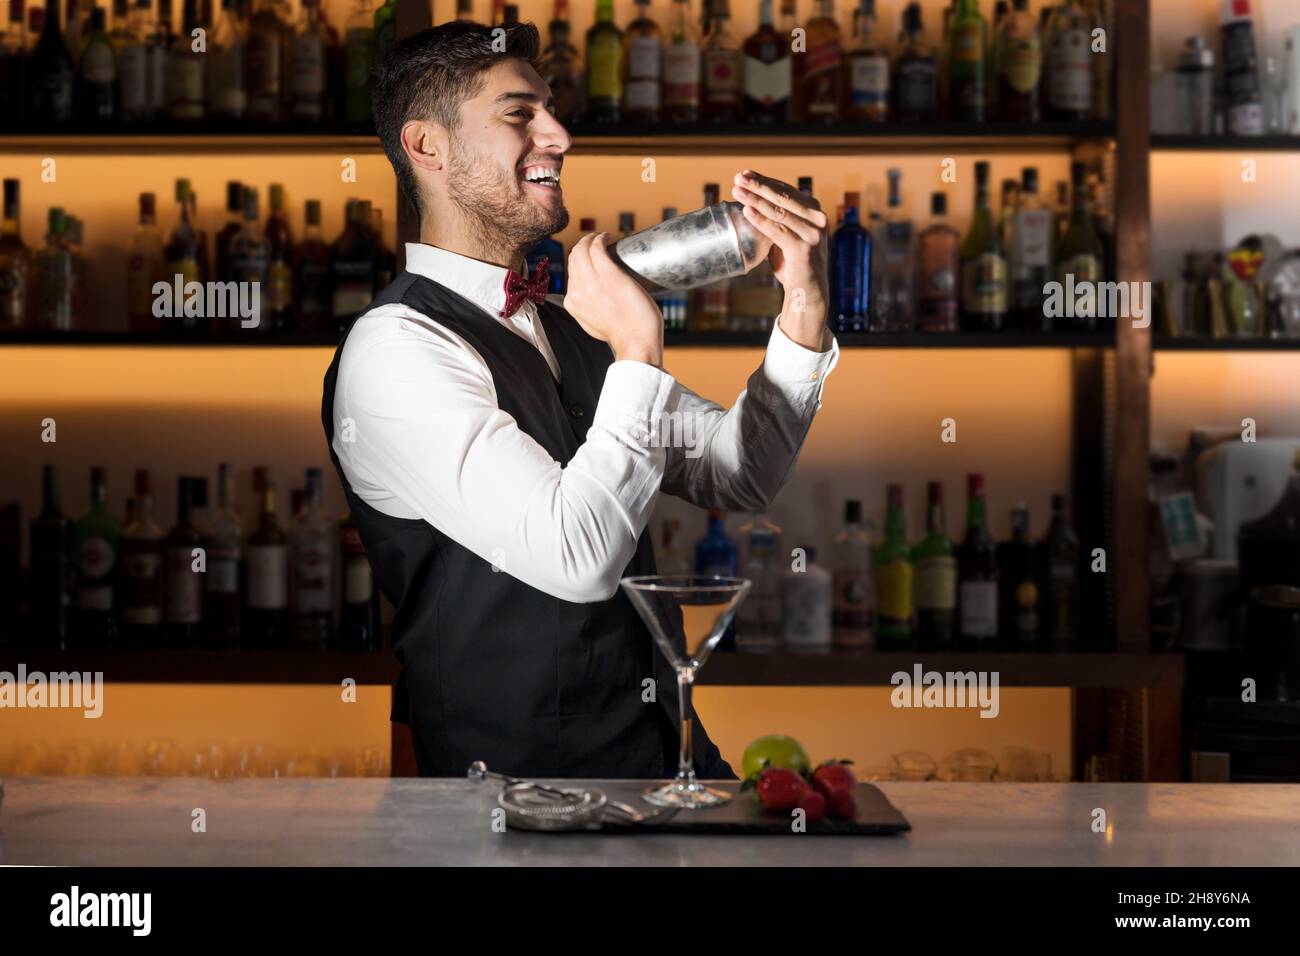 Cool professional bartender making a cocktail, shaking a cocktail shaker. Authentic barman making alcohol beverages in modern bar. High quality photo. Stock Photo